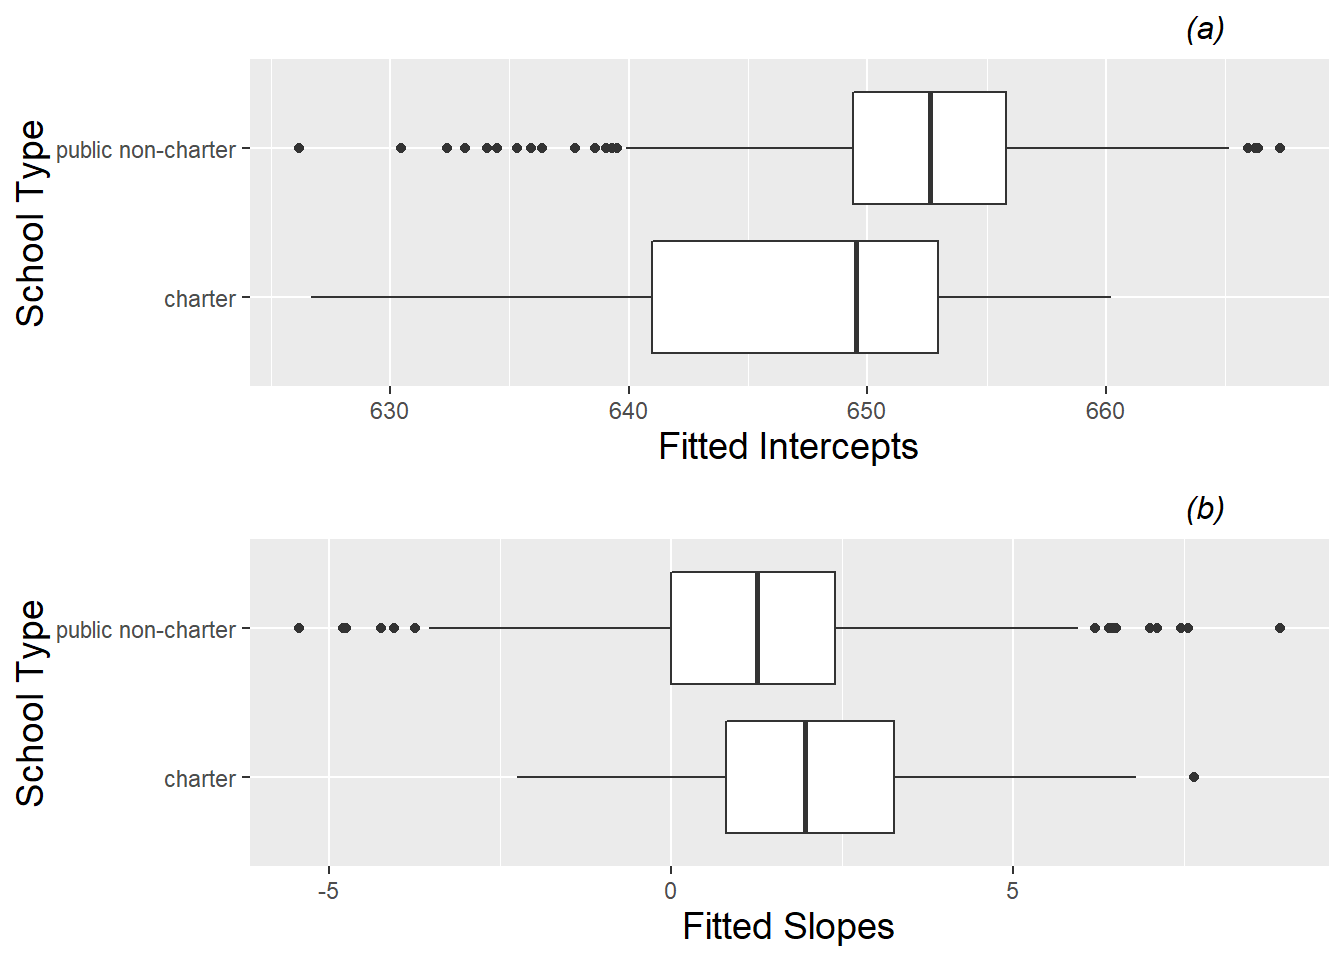 Boxplots of (a) intercepts and (b) slopes by school type (charter vs. public non-charter).